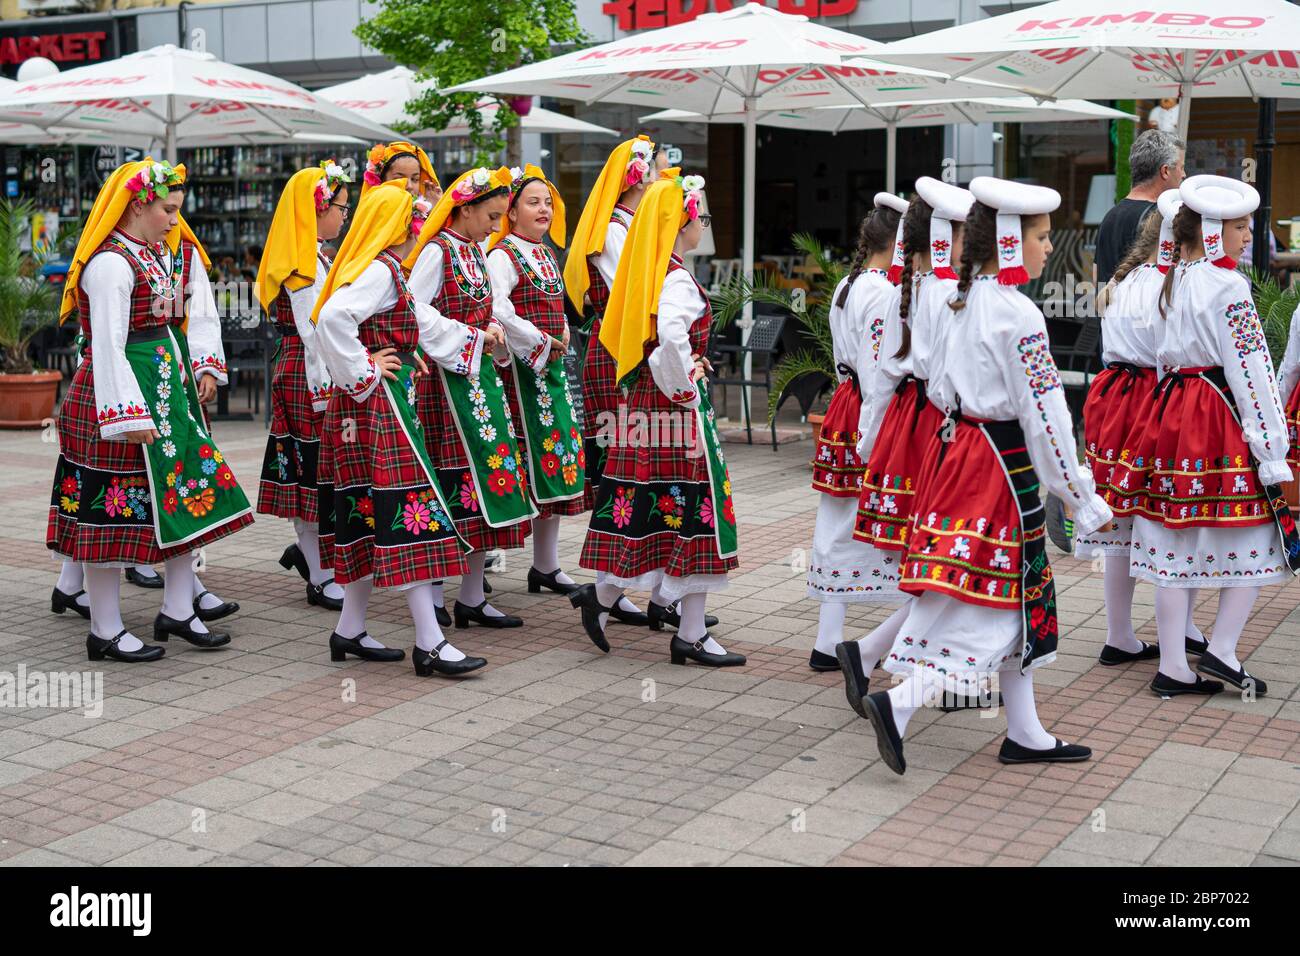 POMORIE, BULGARIA - JUNE 21, 2019: A group of children in Bulgarian national costumes on the streets. Stock Photo